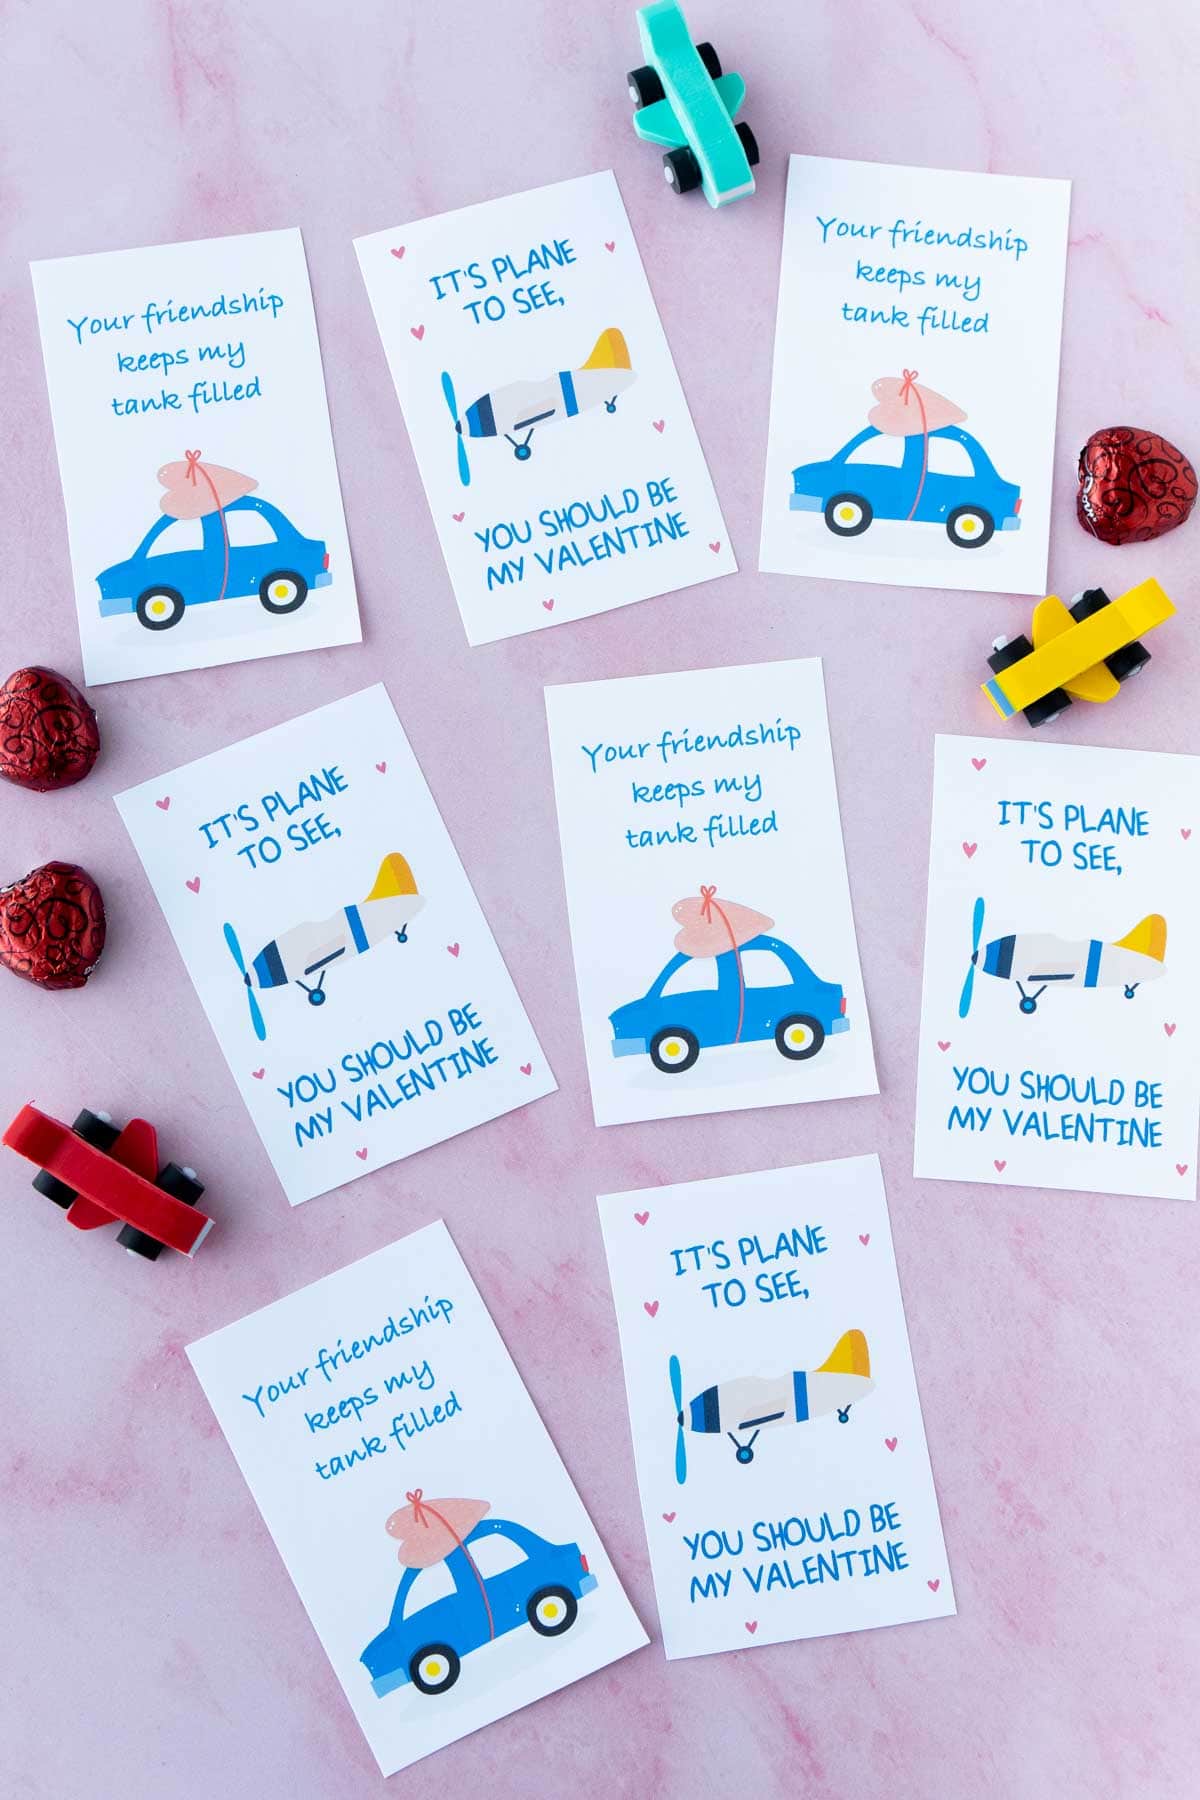 Printed out car valentine and plane valentine cards